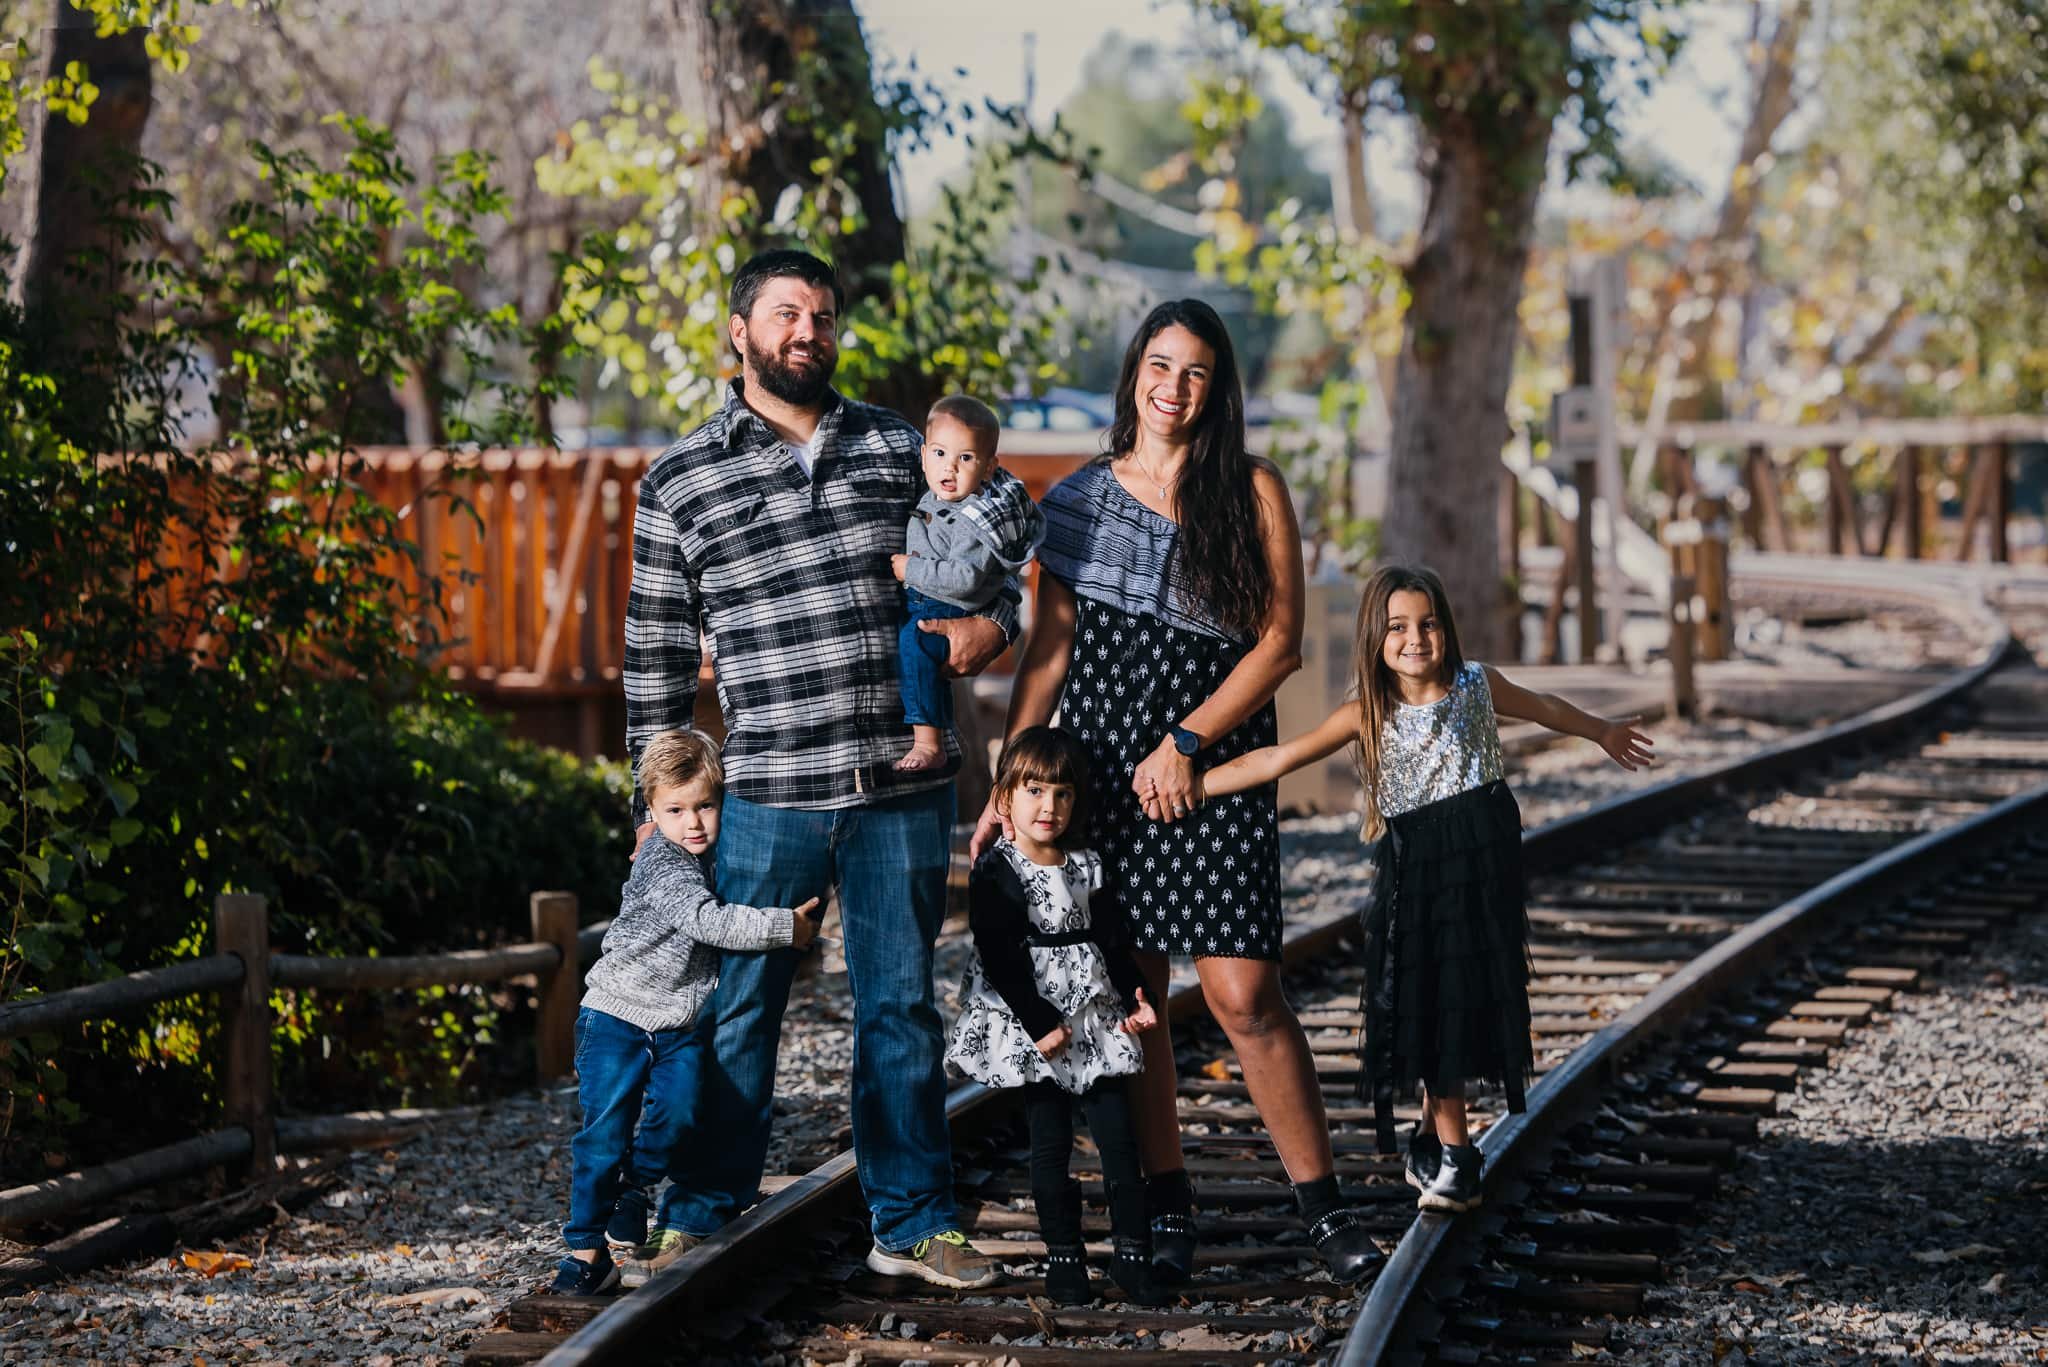 Old Poway Park | Southern California Family Portrait Photo Session-46.jpg